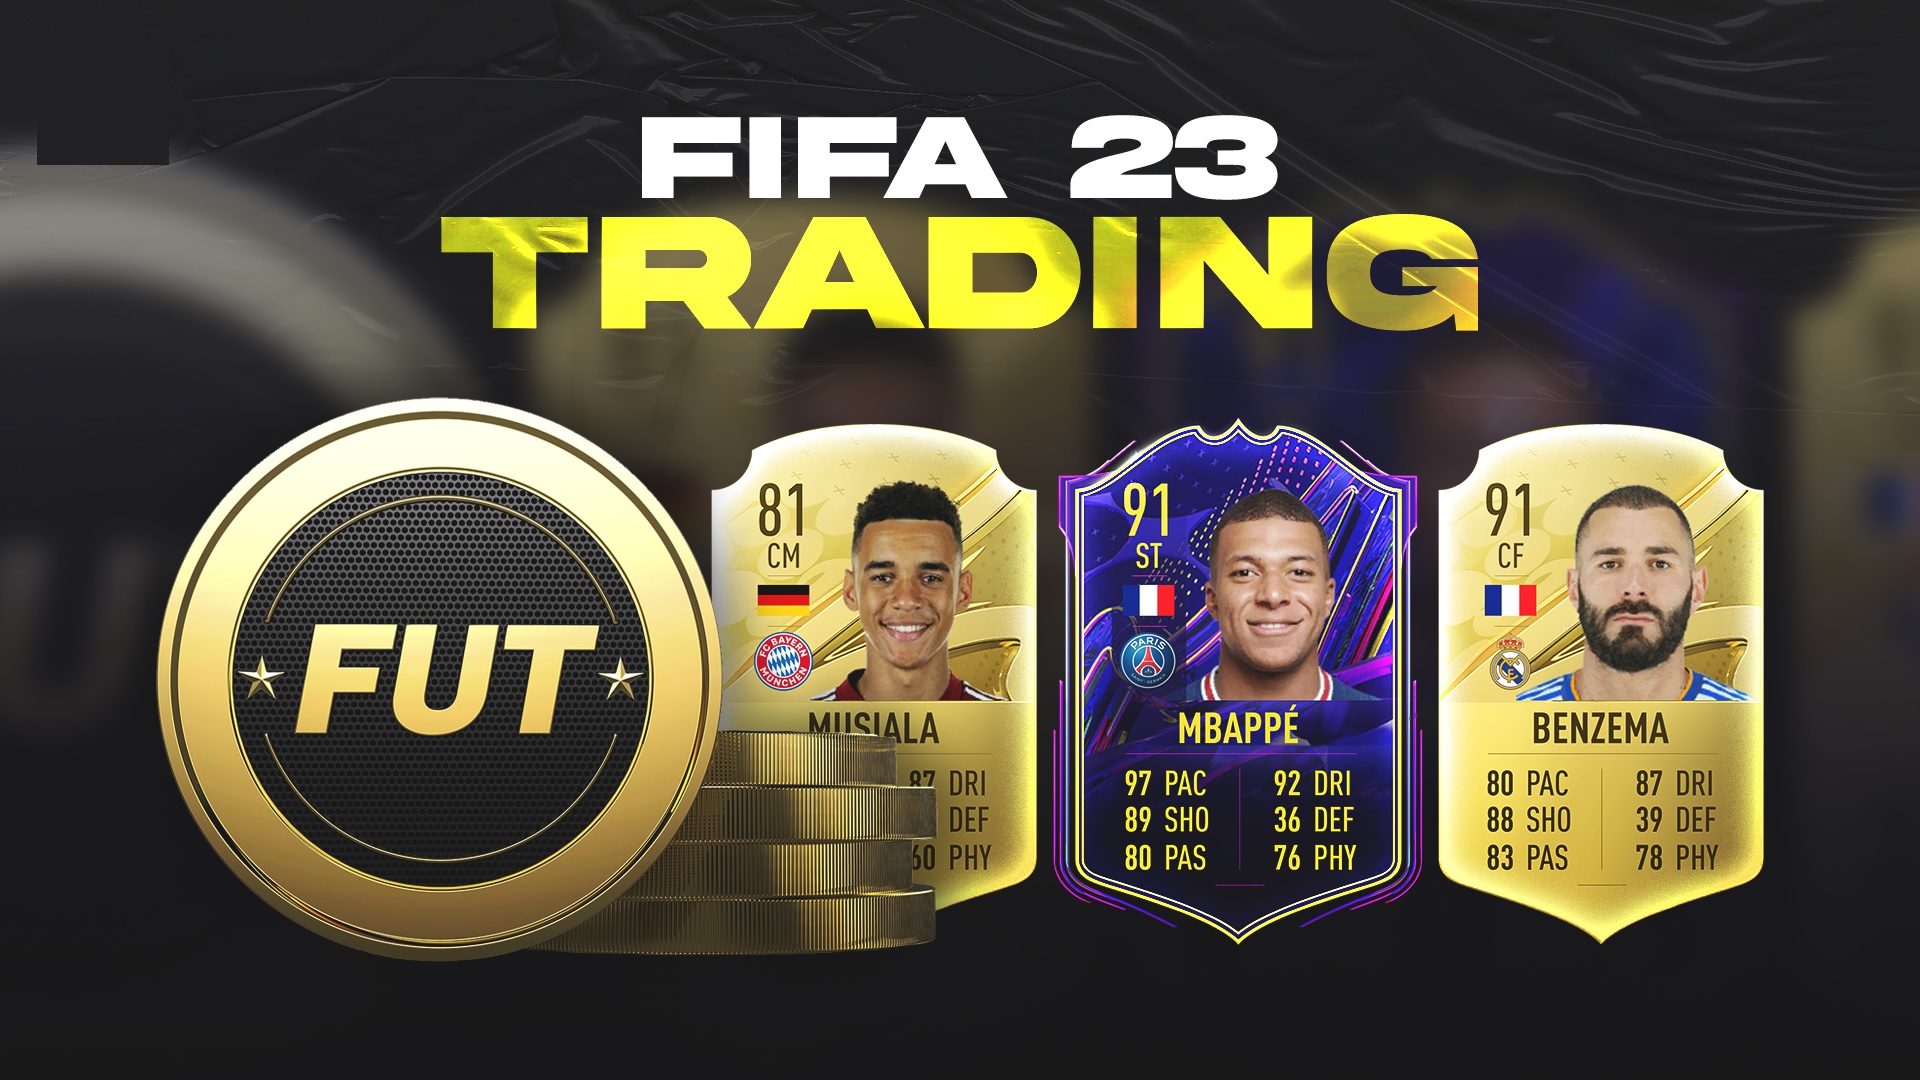 FIFA 23 guide: How to buy and sell players on the FUT market